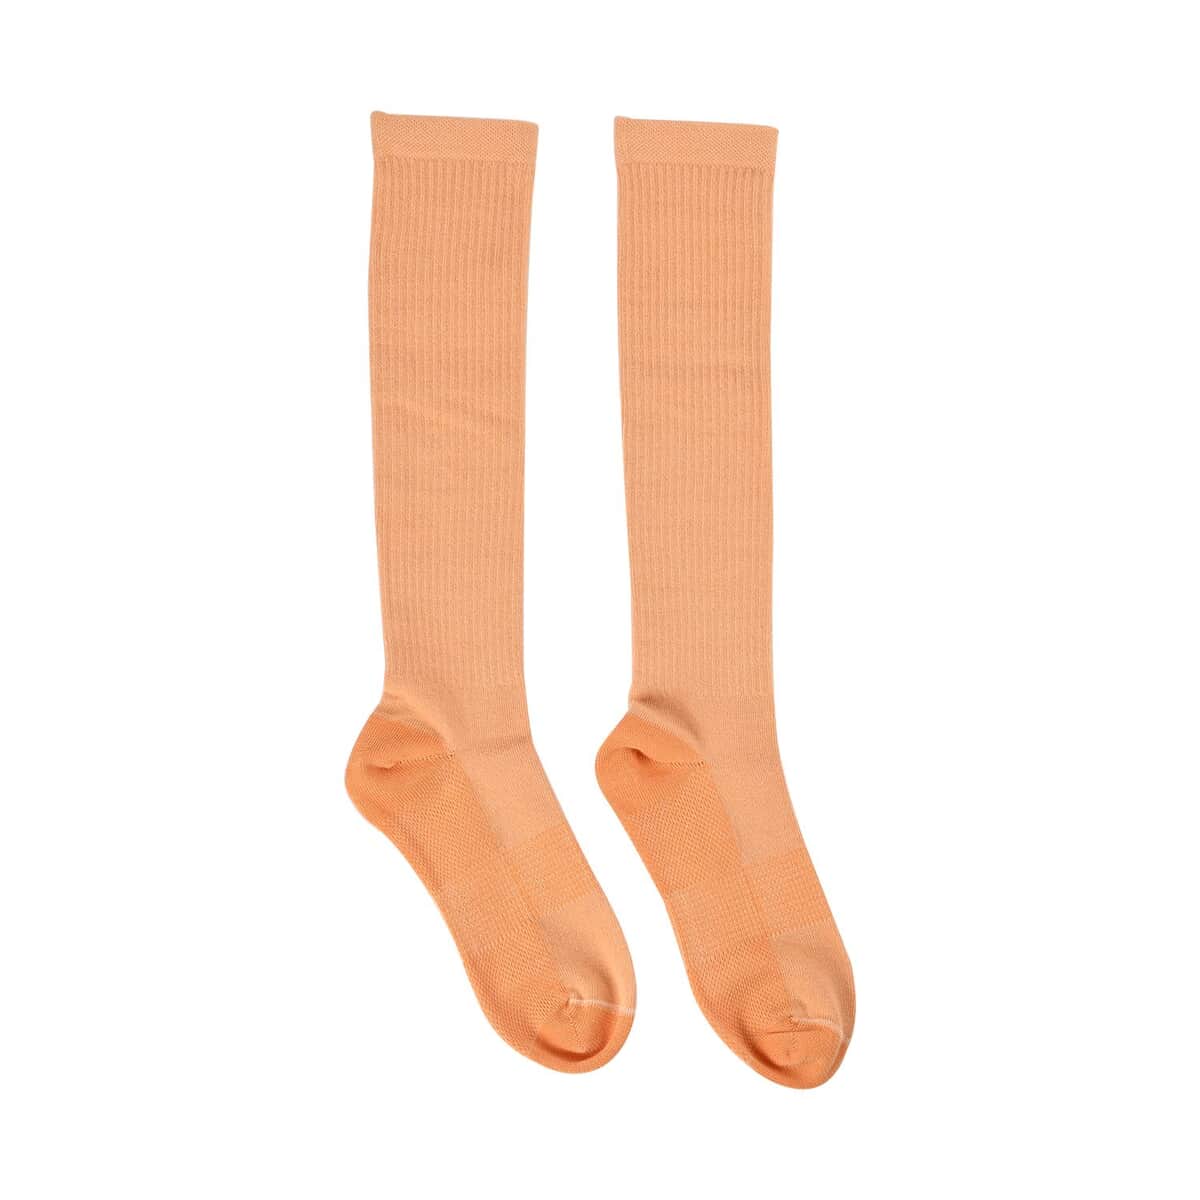 Set of 4 Pairs Copper Infused Compression Knee Length Socks - Classic Multi Color (L/XL) image number 3